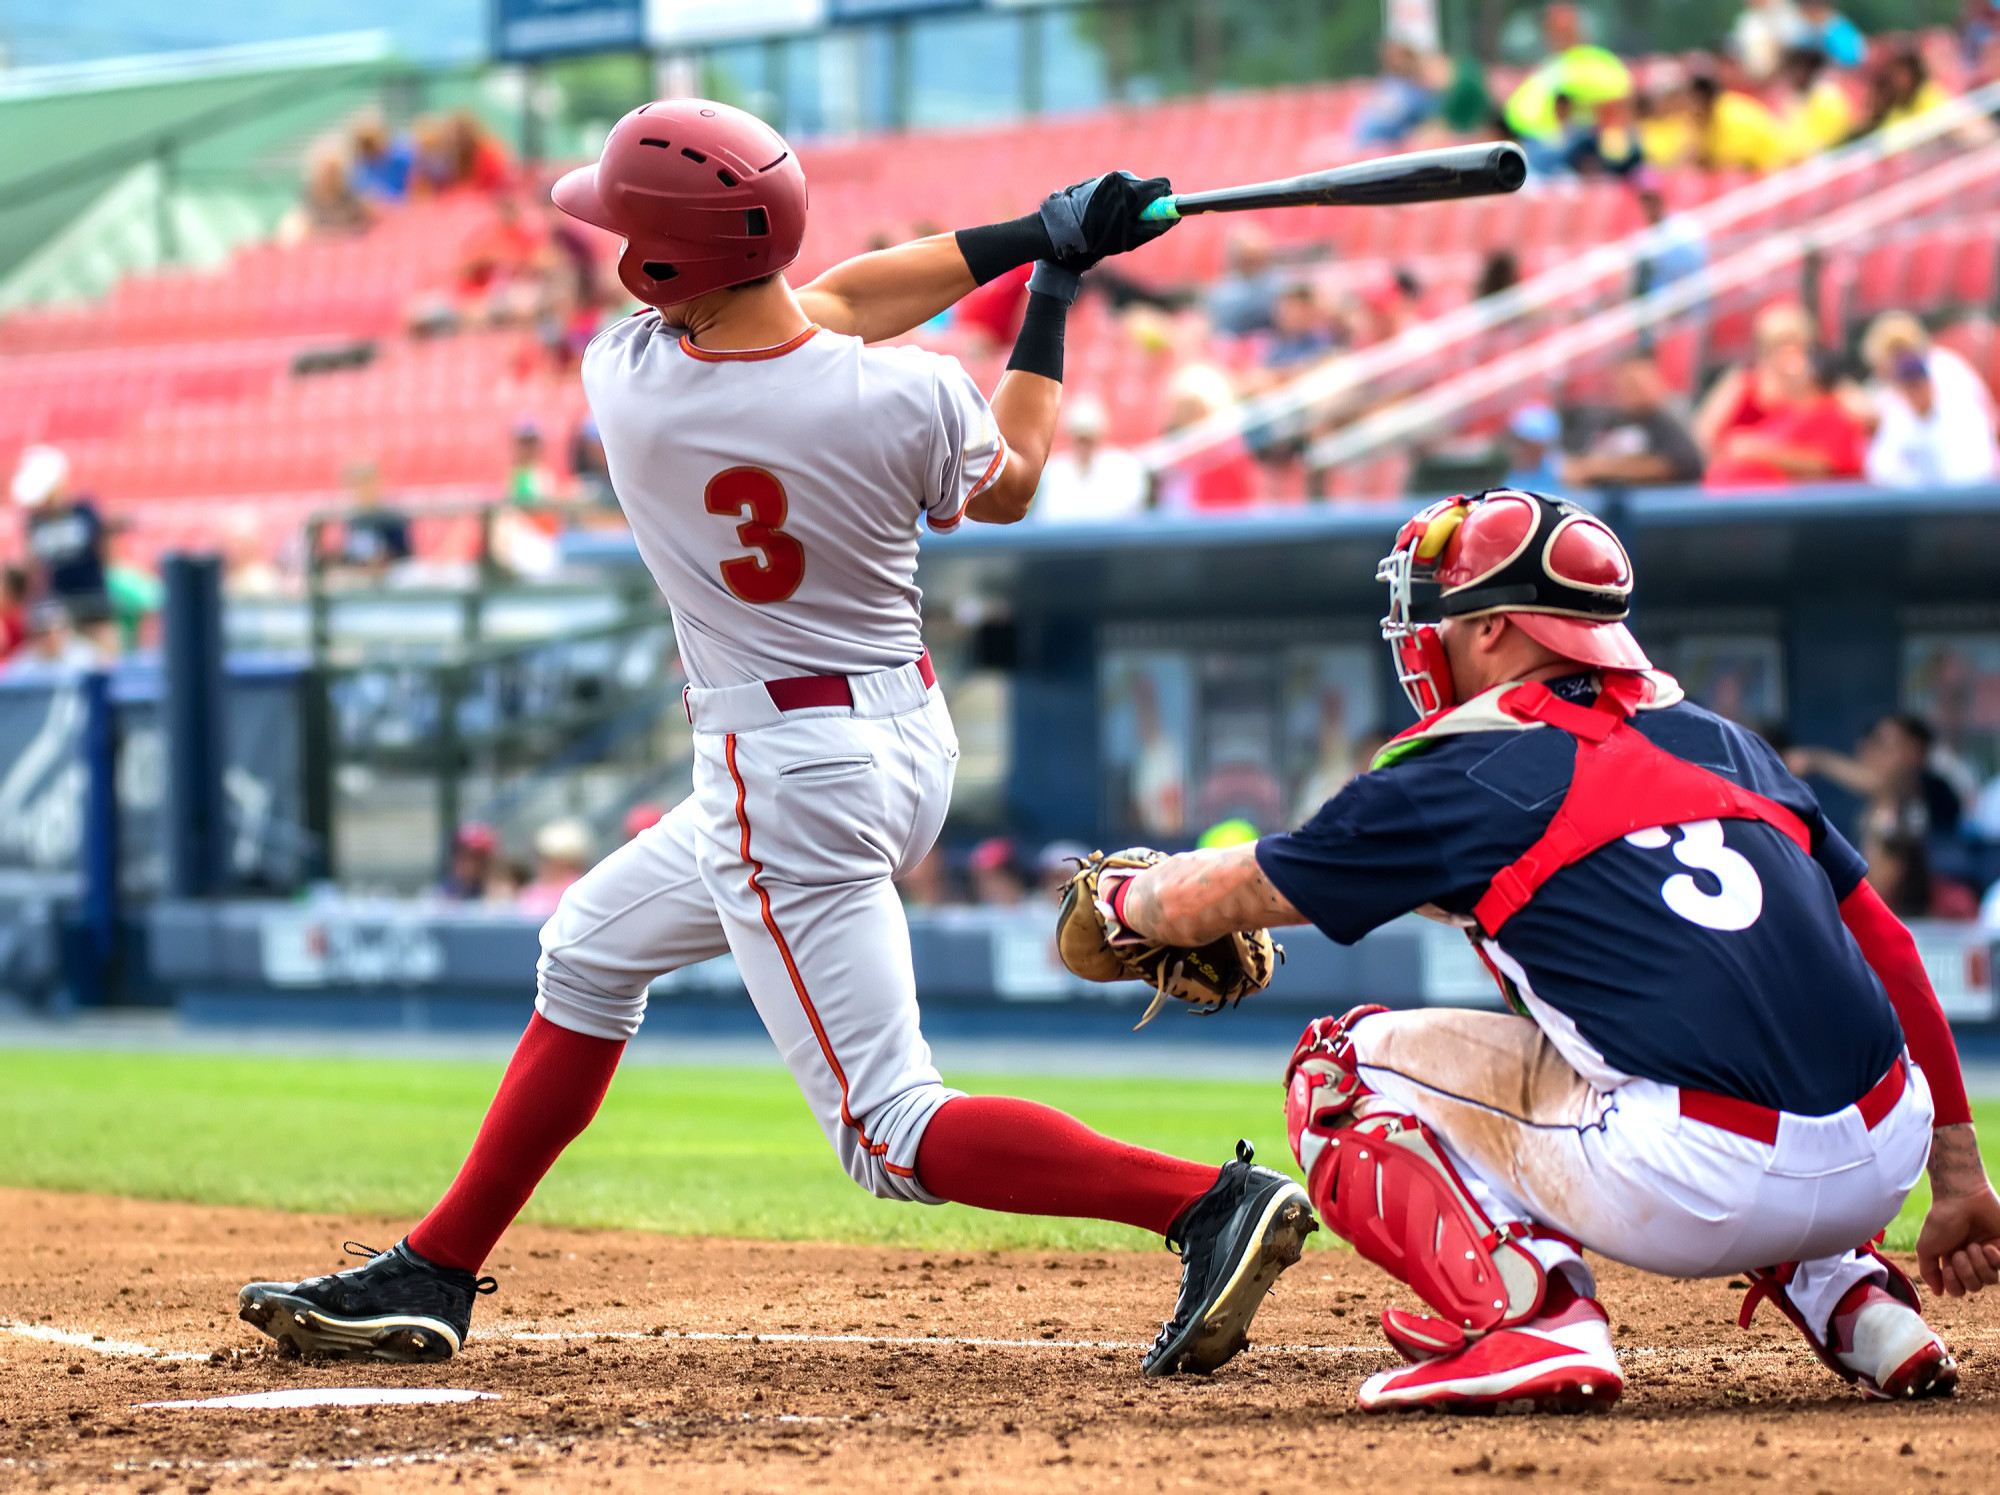 Baseball Tournament Preparation Tips How to Prep for the Ball Games